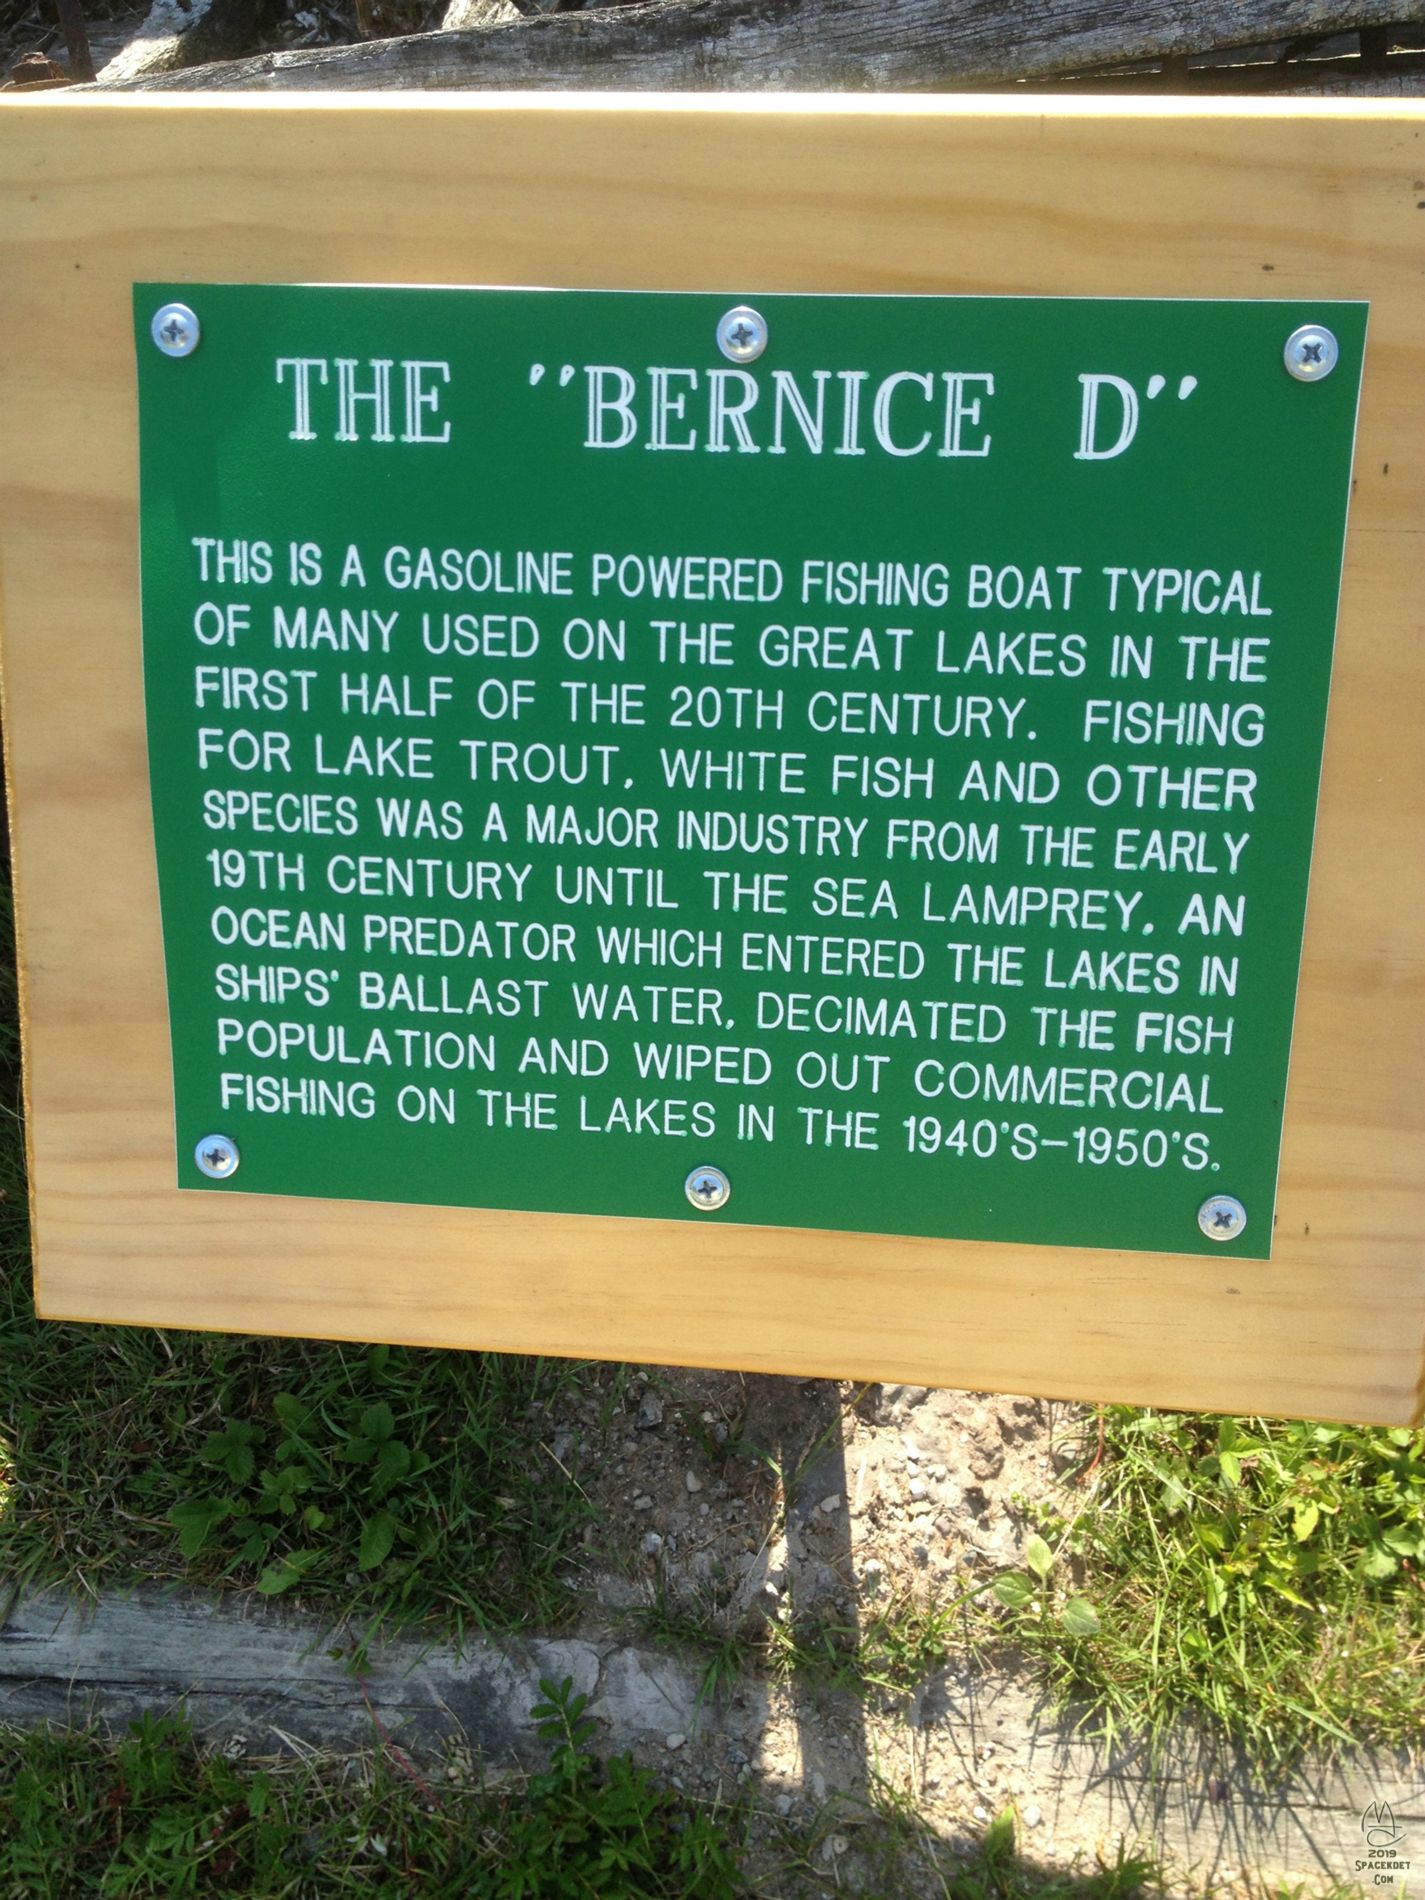 More about Bernice.